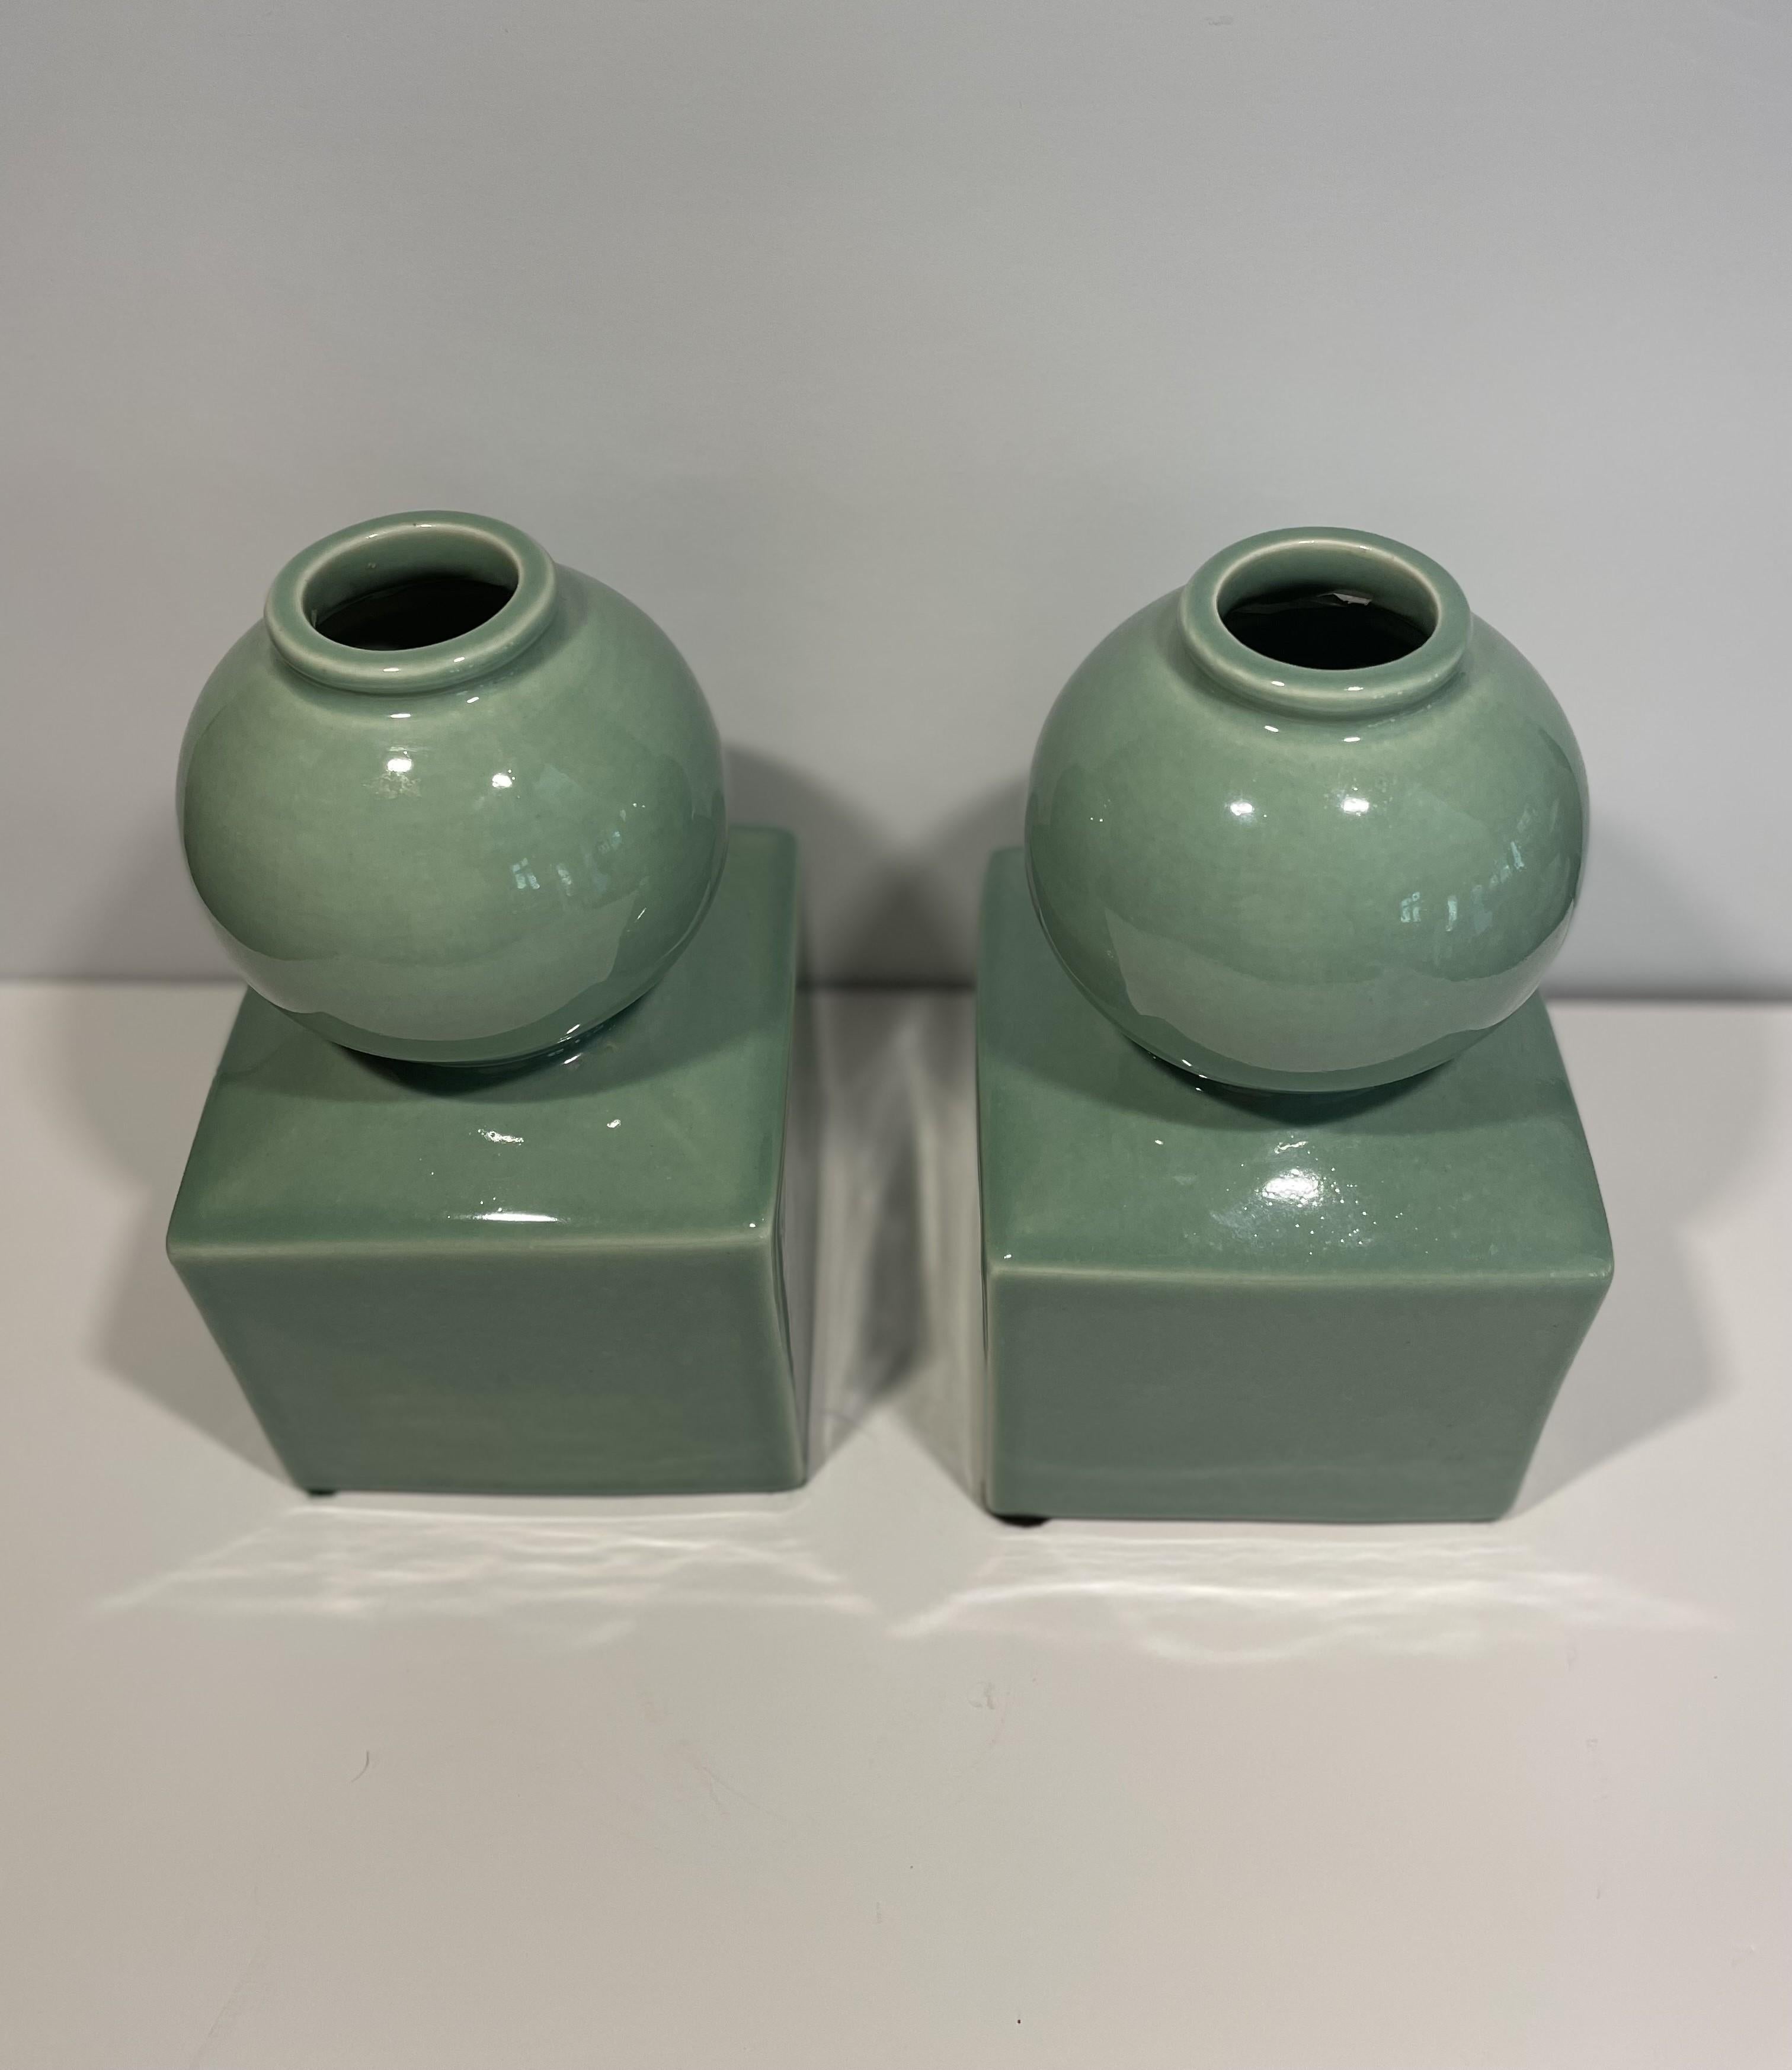 American Celadon Ceramic Vases or Bookends Attributed to Serena & Lily -- A Pair For Sale